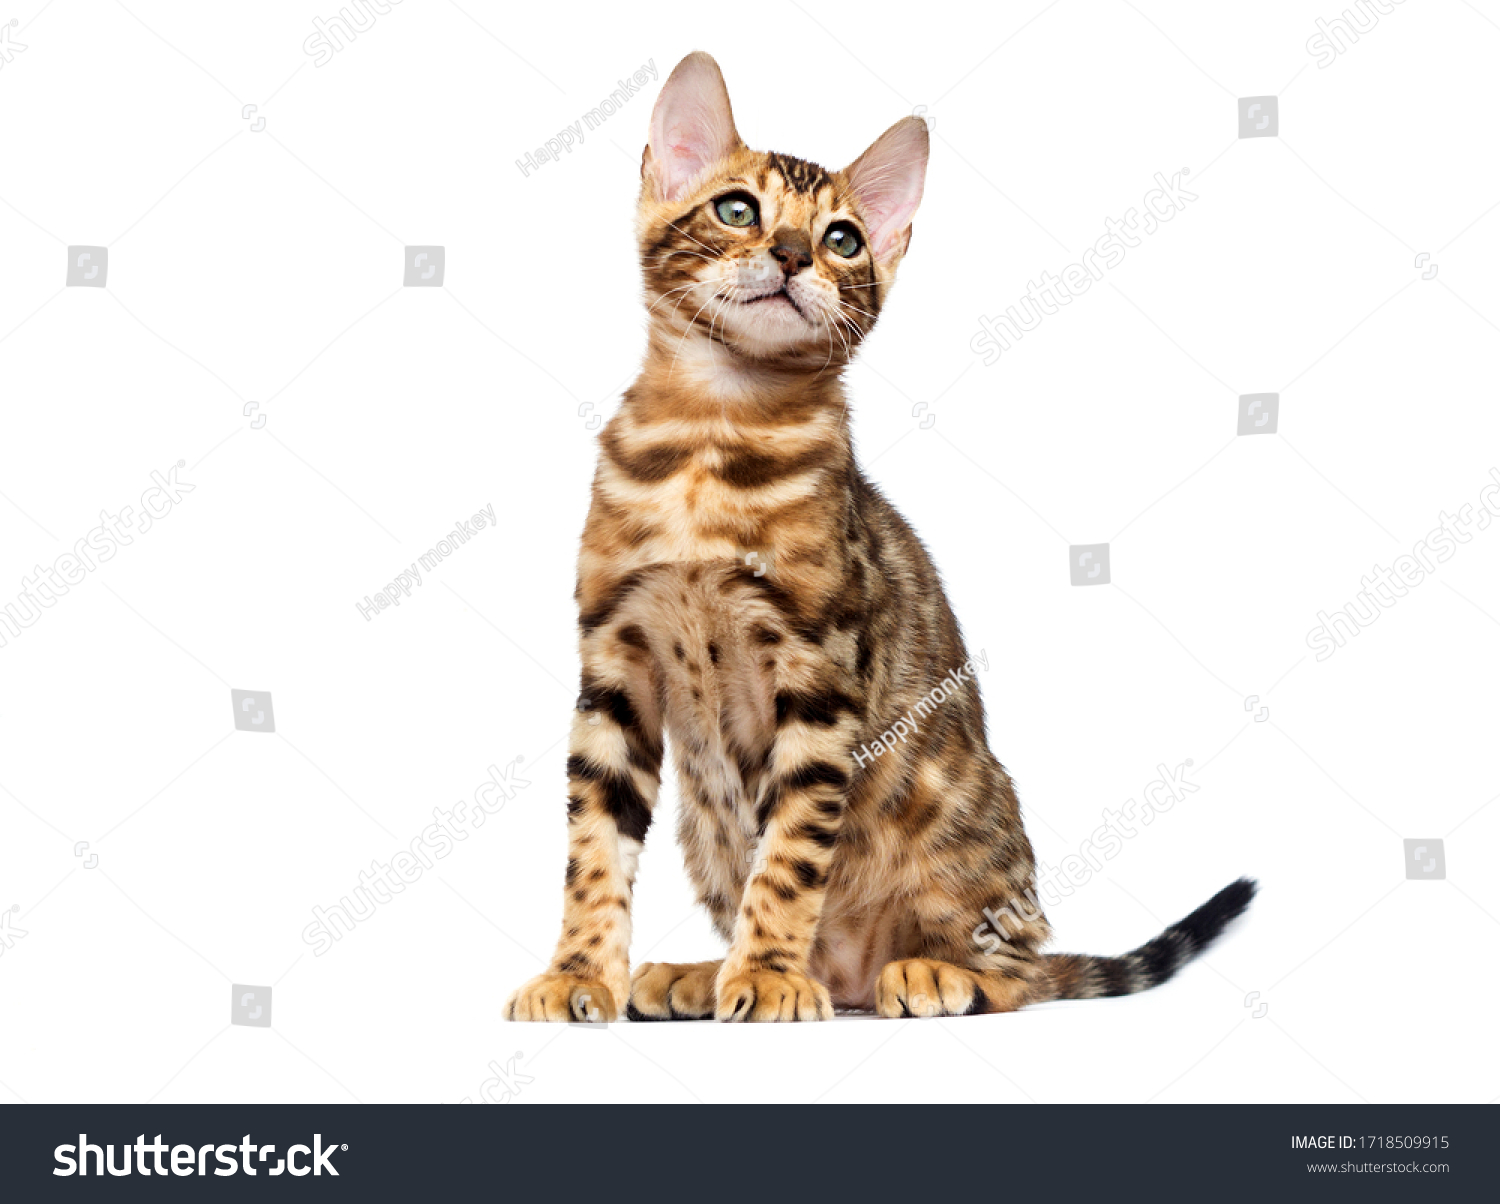 bengal cat sitting on a white background #1718509915